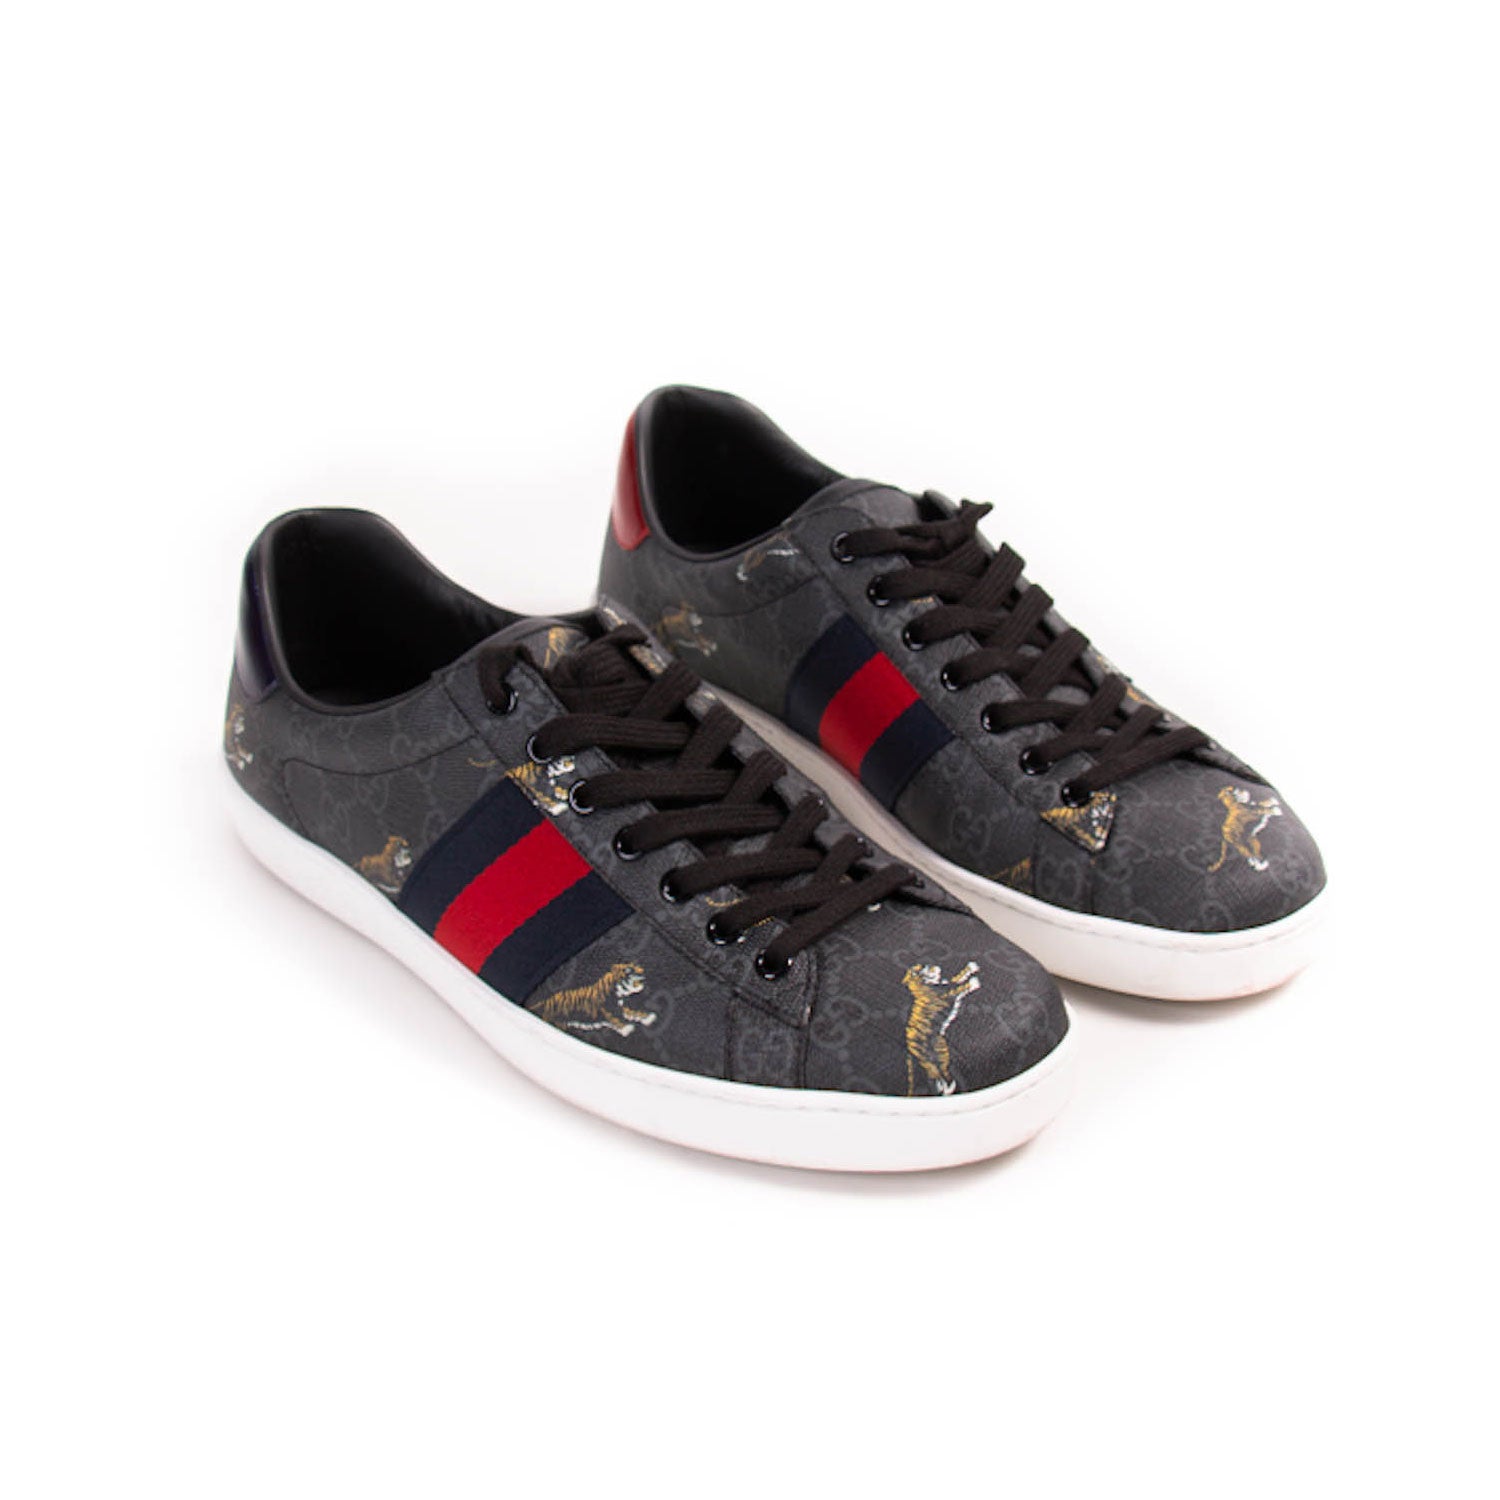 Shop authentic Gucci Ace GG Supreme Tiger Prints Sneakers at revogue ...